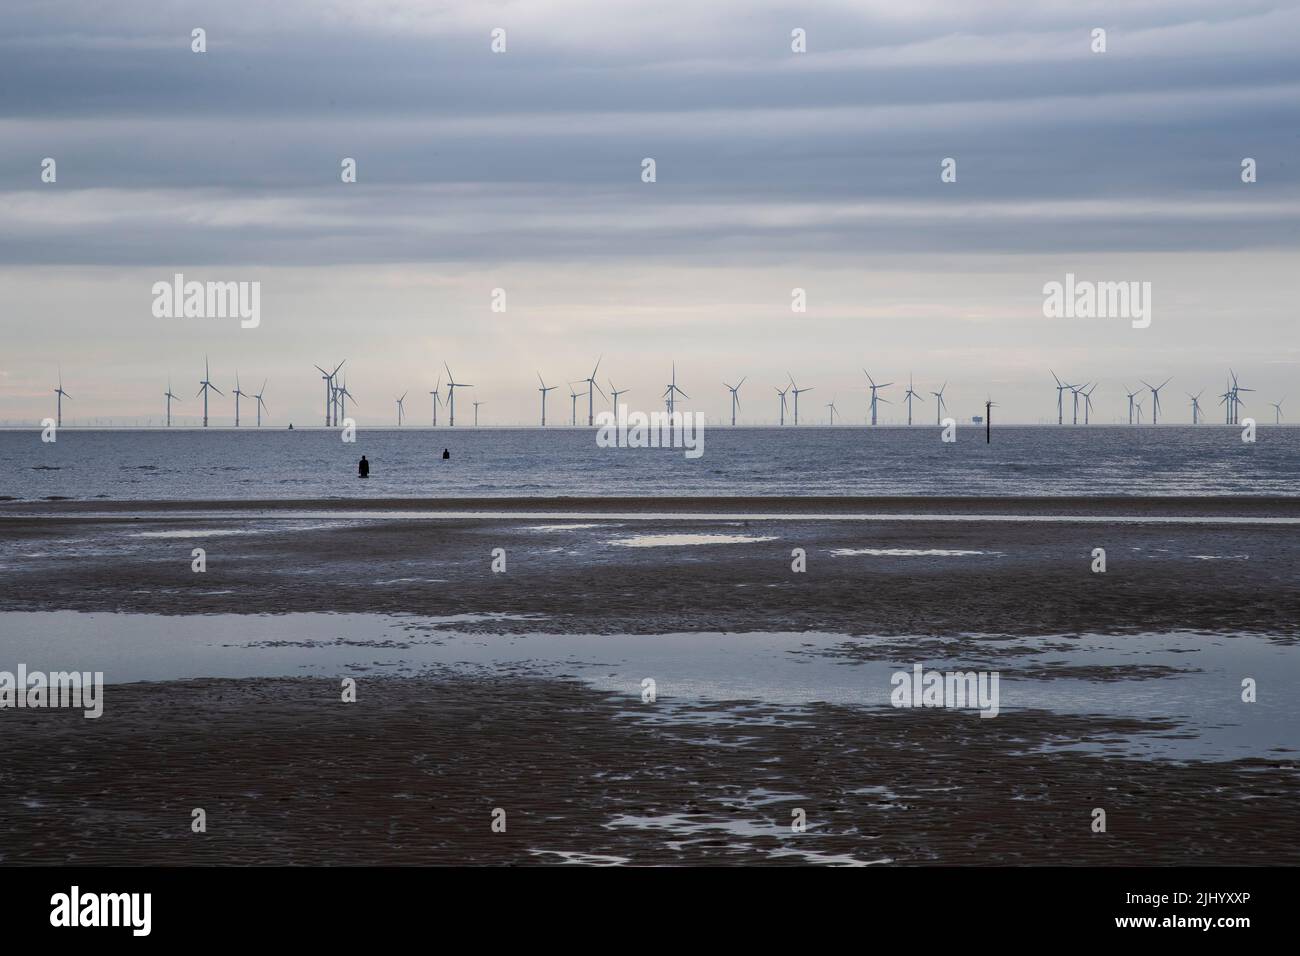 Banks of Off shore wind farms at Crosby beach in Merseyside generating renewable energy with Antony Gormley statues visible in the sea Stock Photo